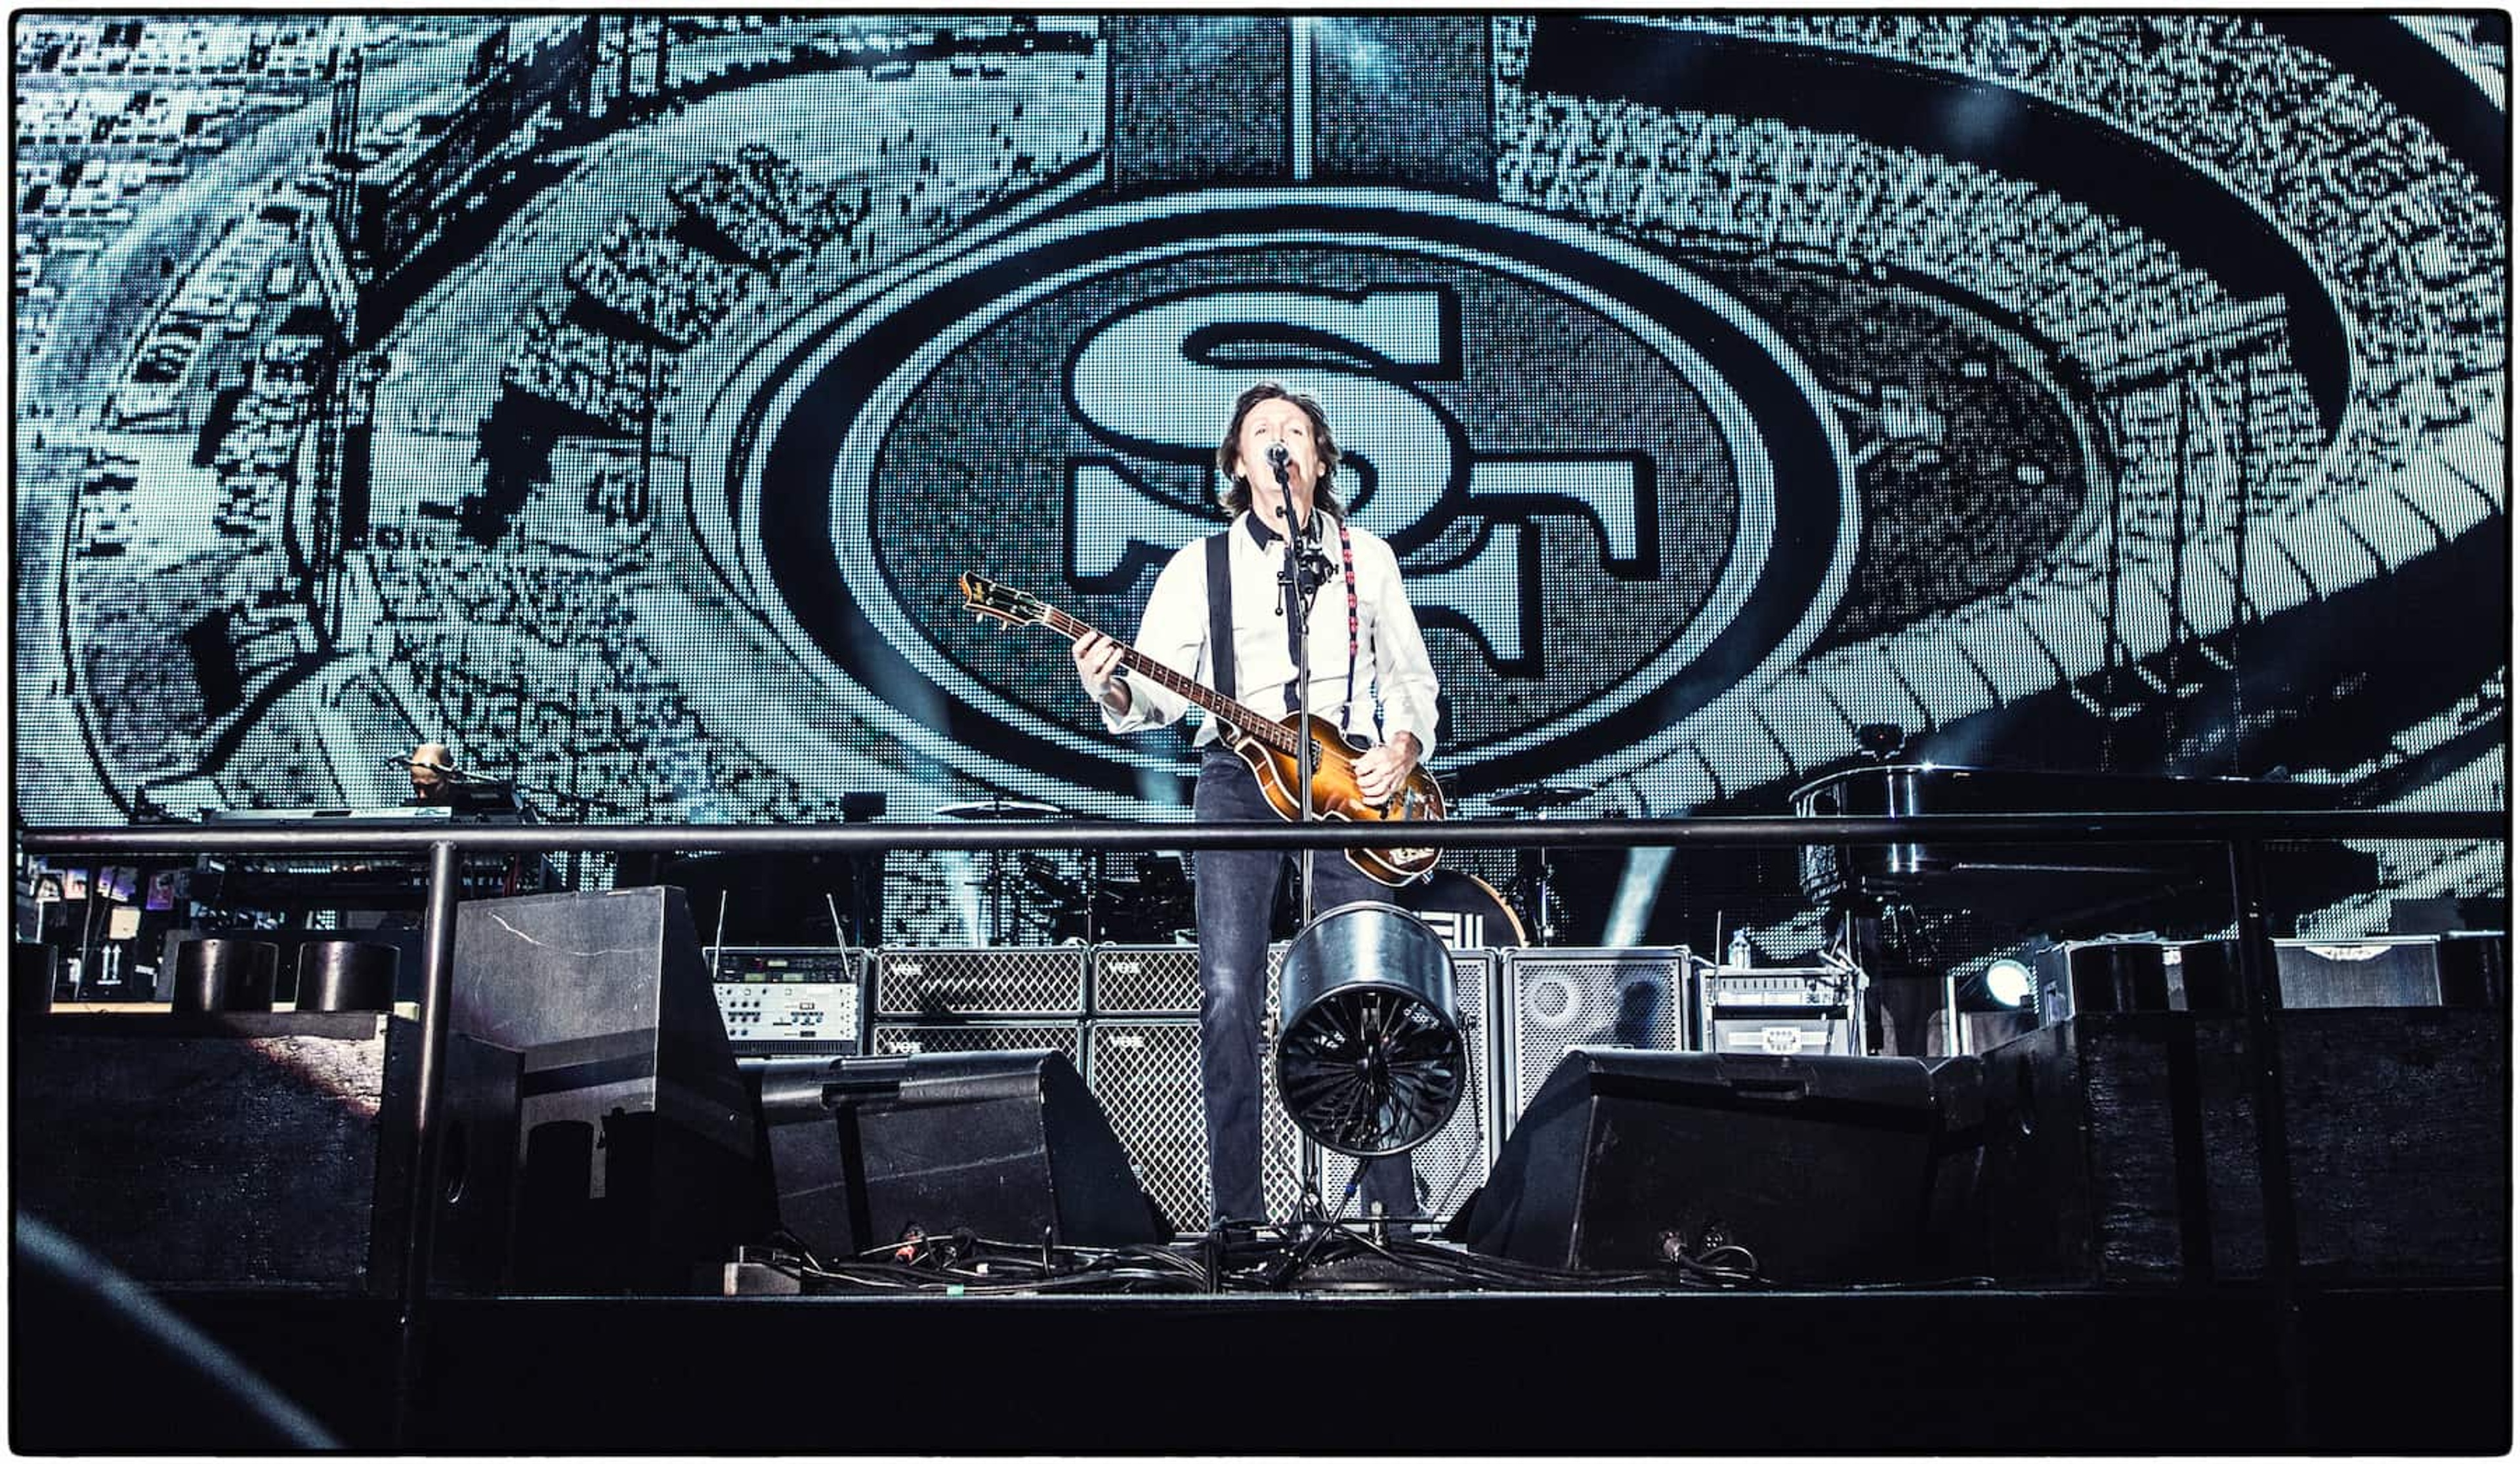 Photo of Paul McCartney performing at Candlestick Park in San Francisco in 2014